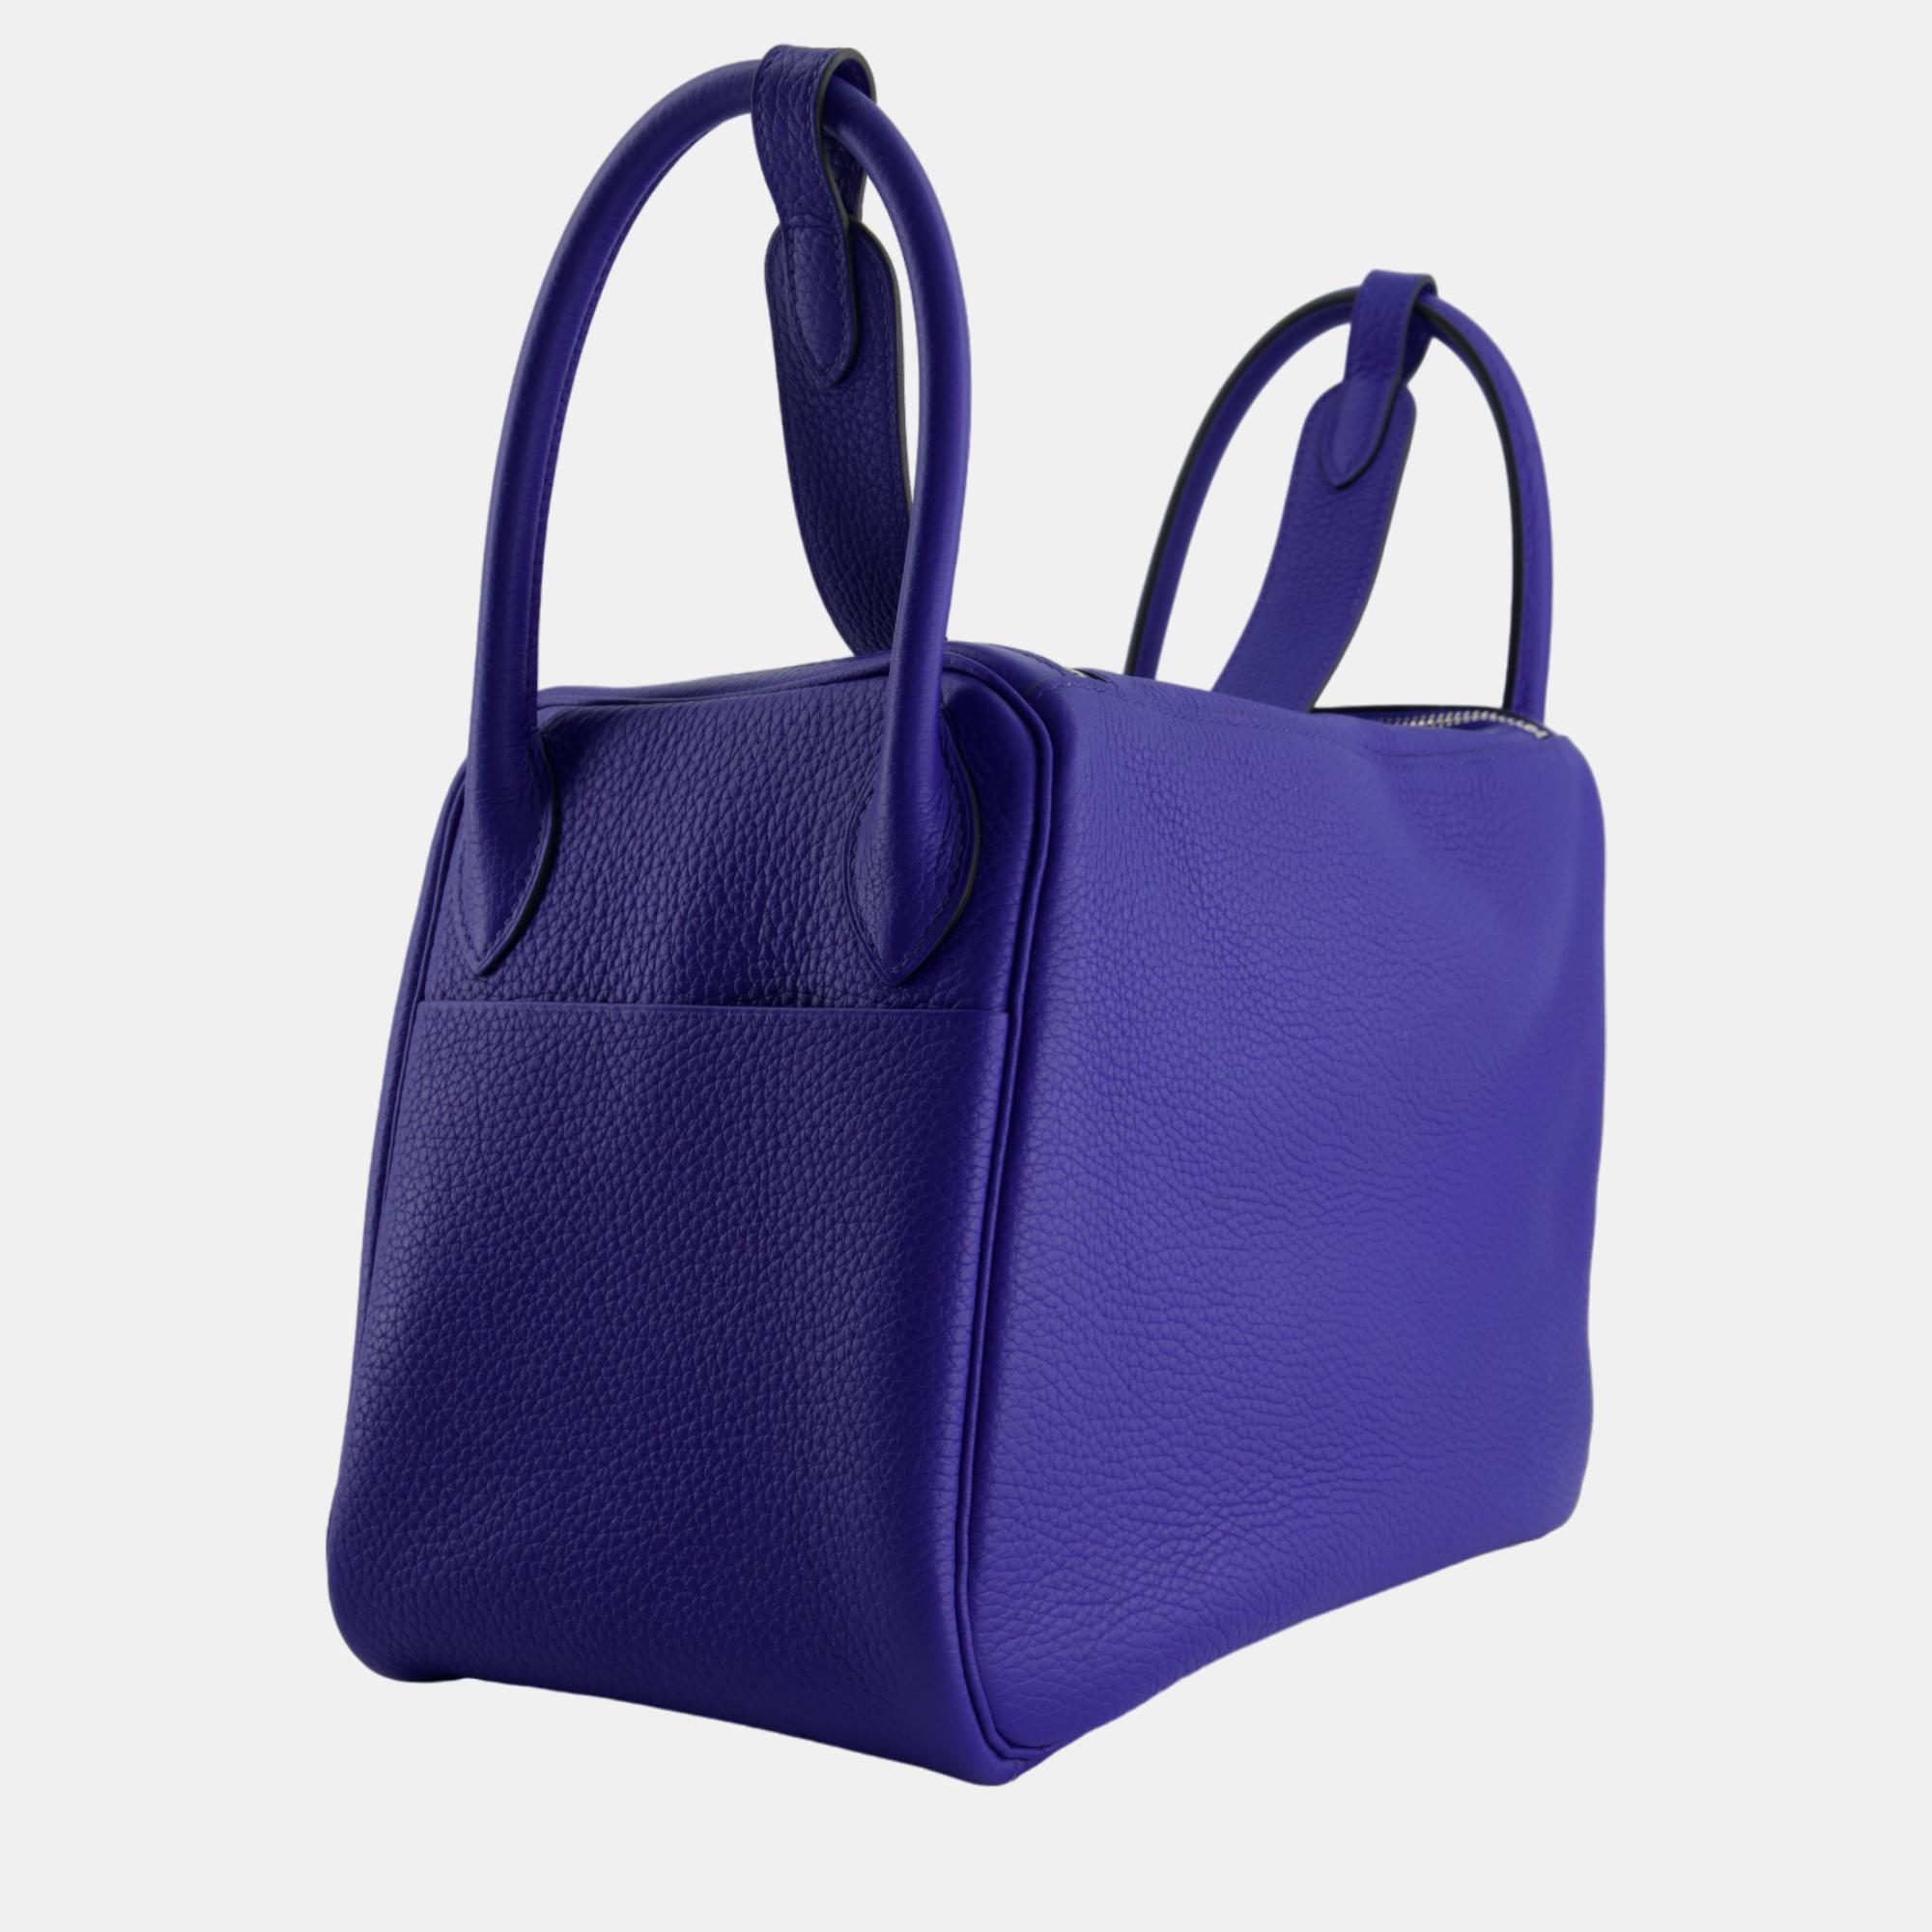 Hermes Lindy Bag 30cm In Blue Electric In Clemence Leather With Palladium Hardware